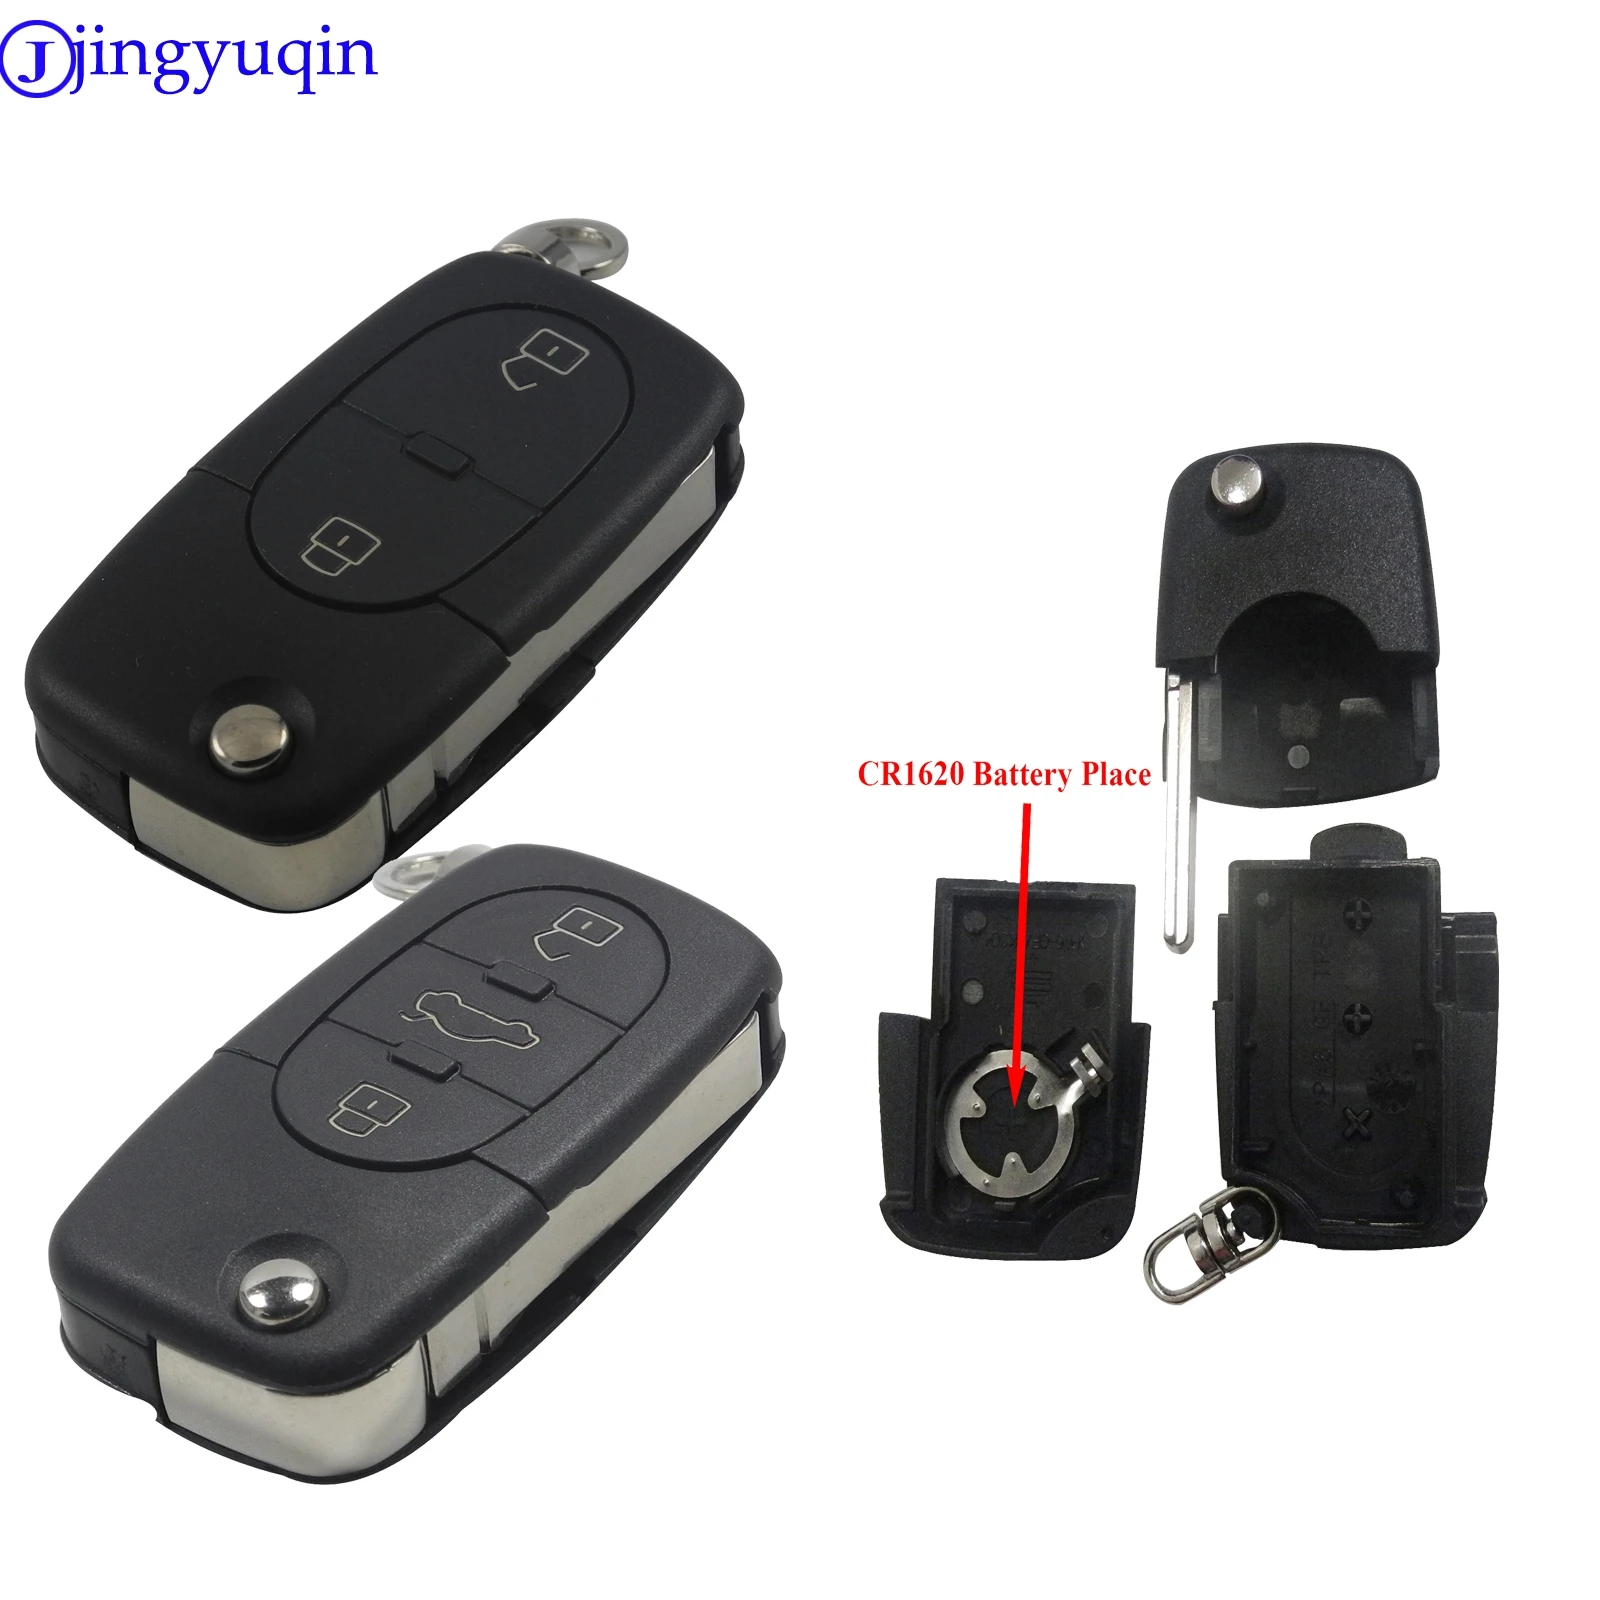 

jingyuqin 2/3 Buttons Flip Remote Car Key Shell Styling For Audi A2 A3 A4 A6 A8 TT Fob Case Cover CR1620